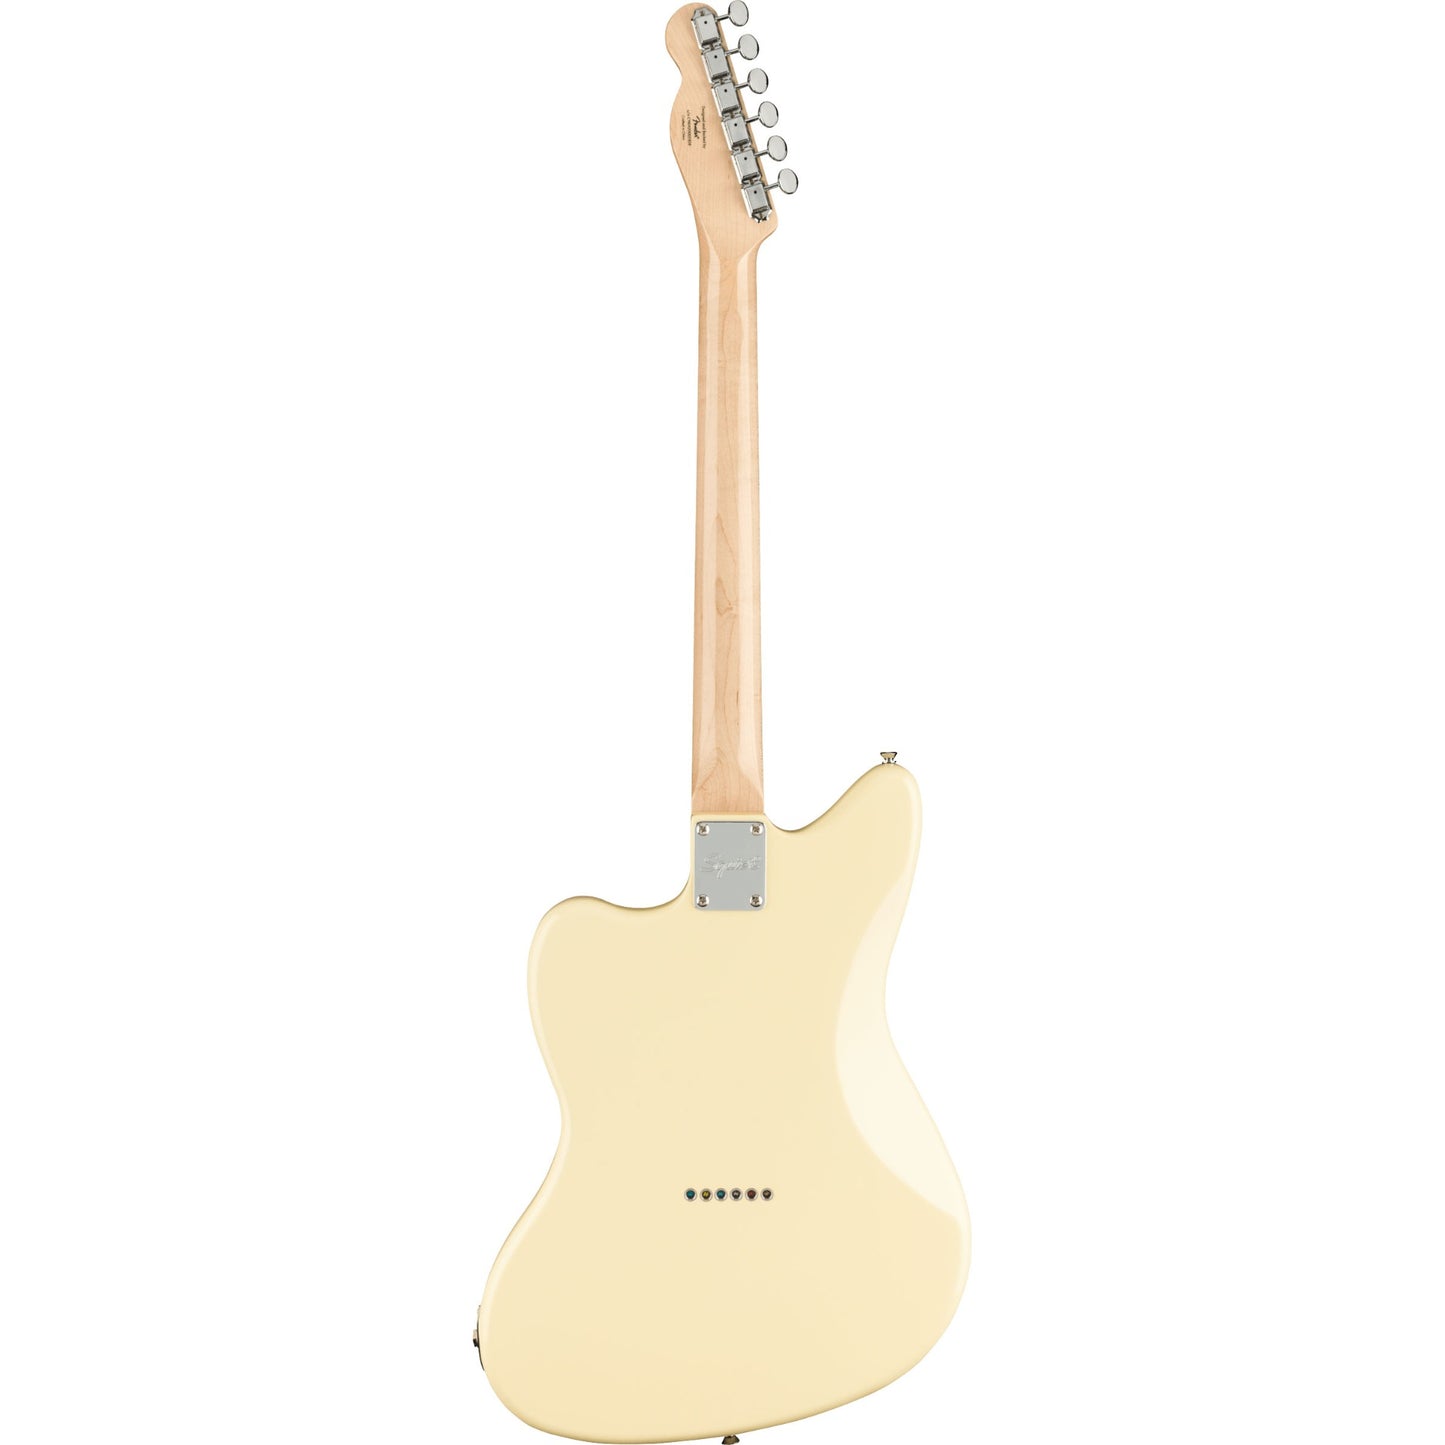 Squier Paranormal Series Offset Telecaster Electric Guitar in Olympic White